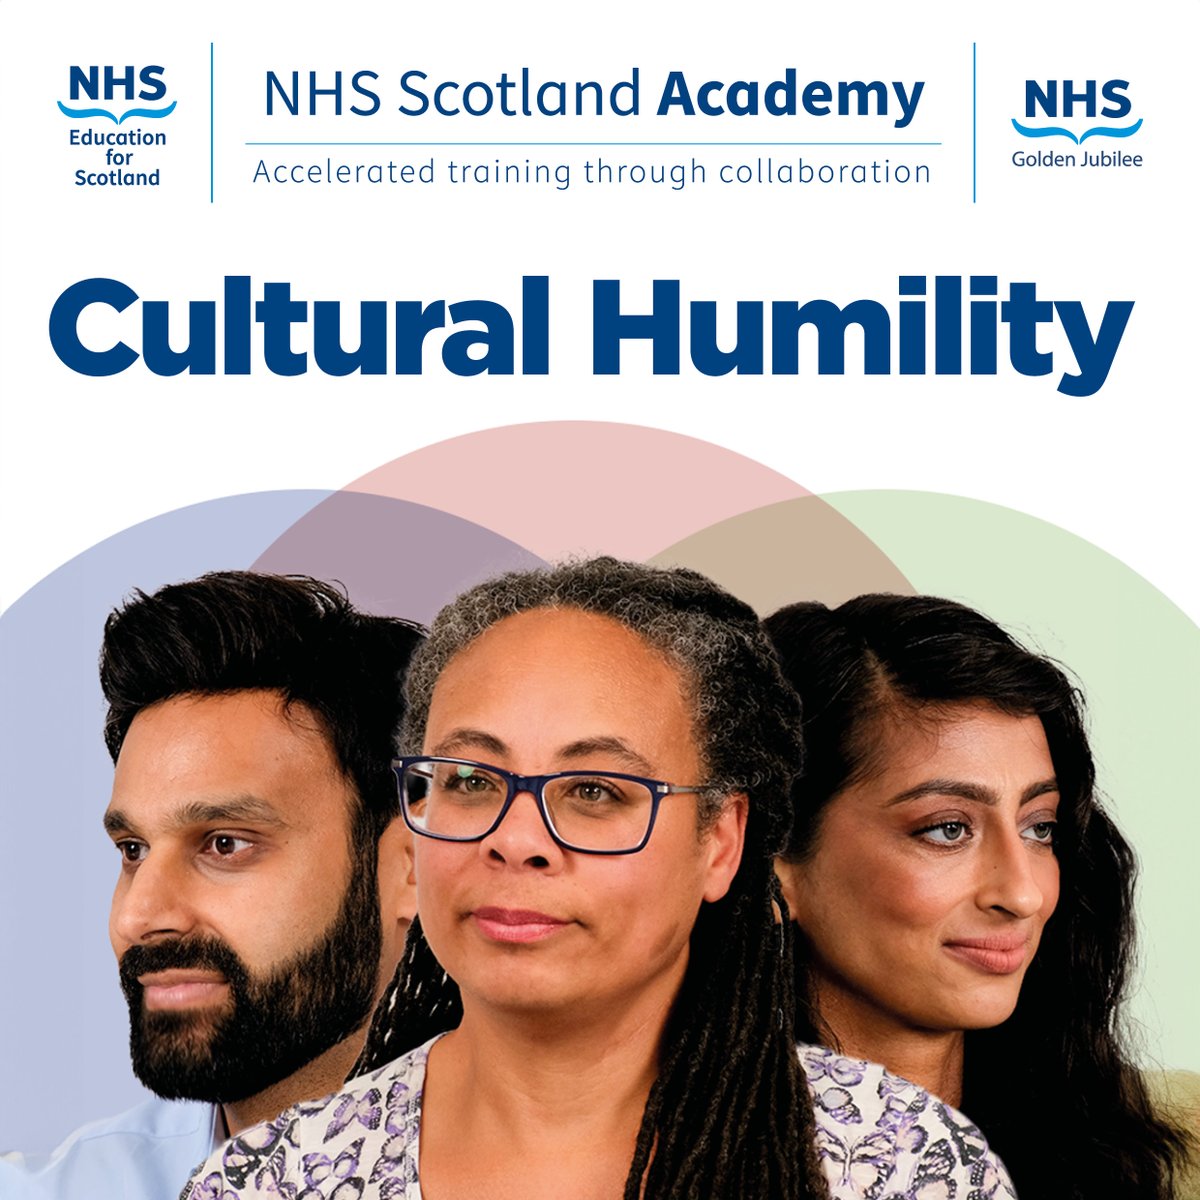 🧵1/3Today we are excited to launch our new Cultural Humility digital resource. Available to all staff across health and social care, this starter resource provides learners with tools to develop their cultural humility values, attitudes and behaviours. 💻learn.nes.nhs.scot/71848#